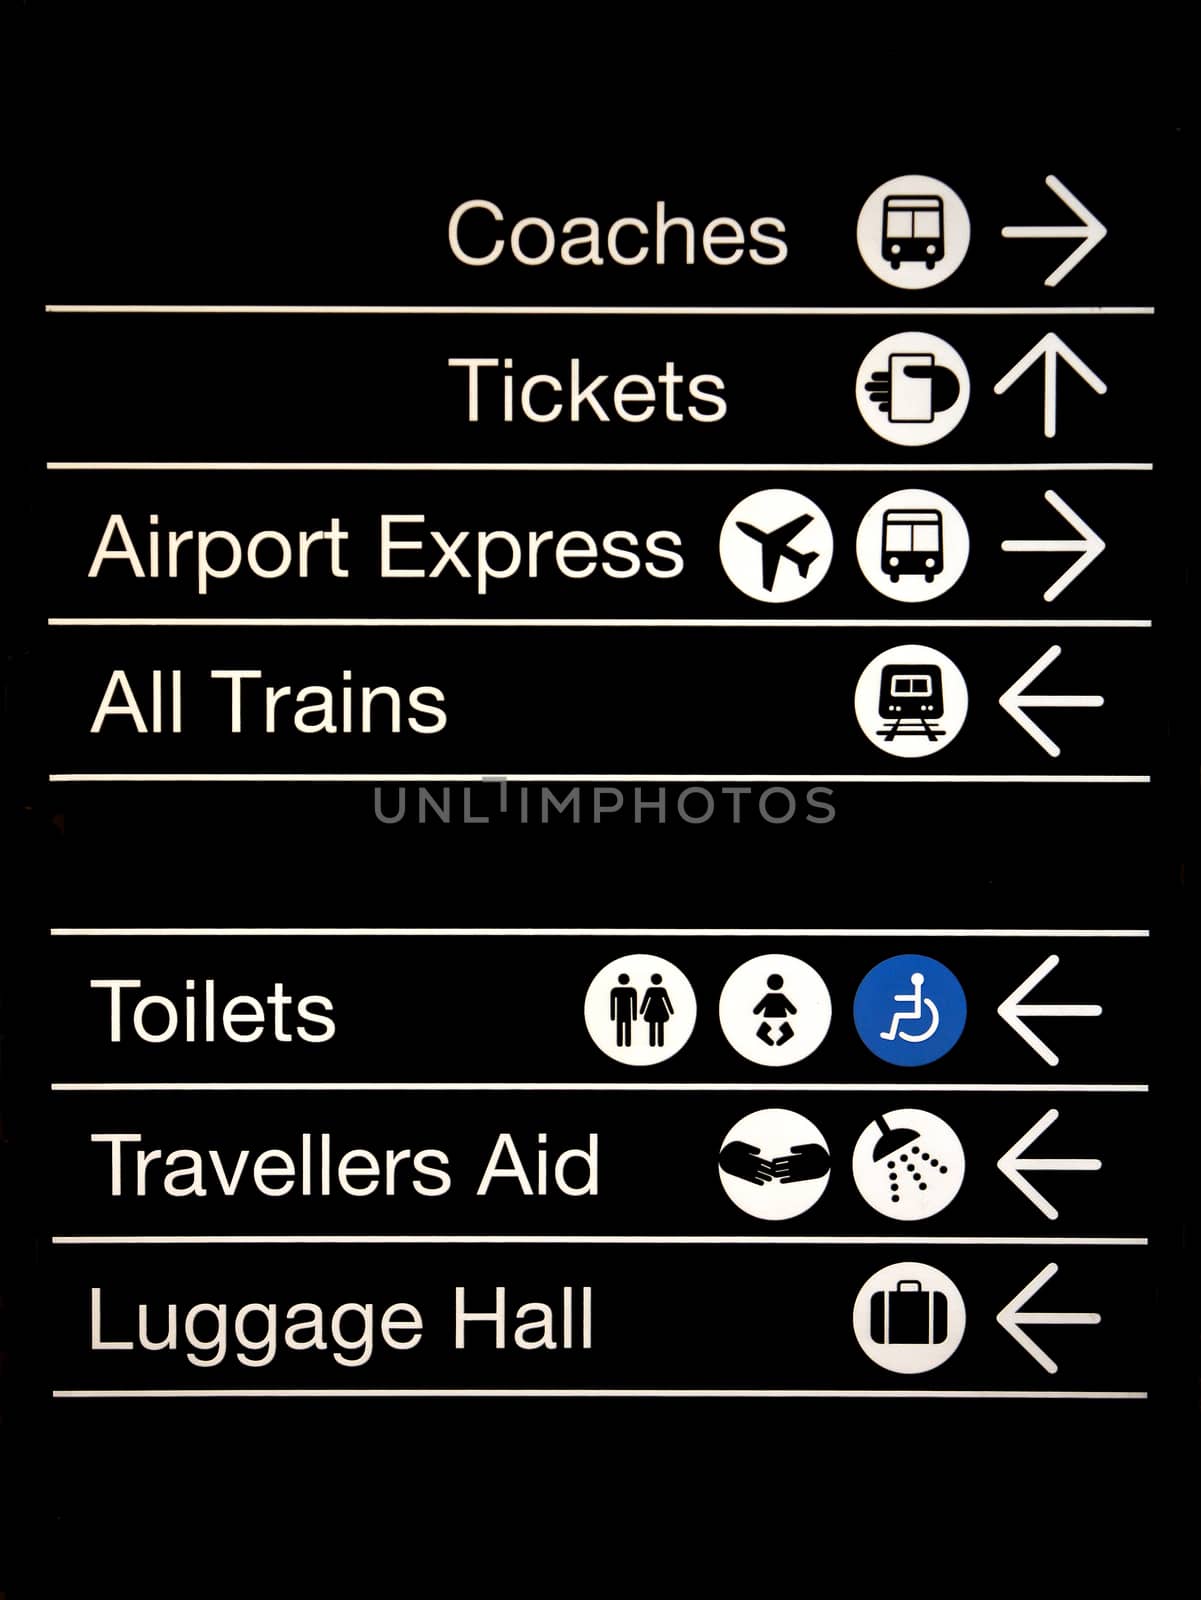 Transport Signs on a board at an Airport